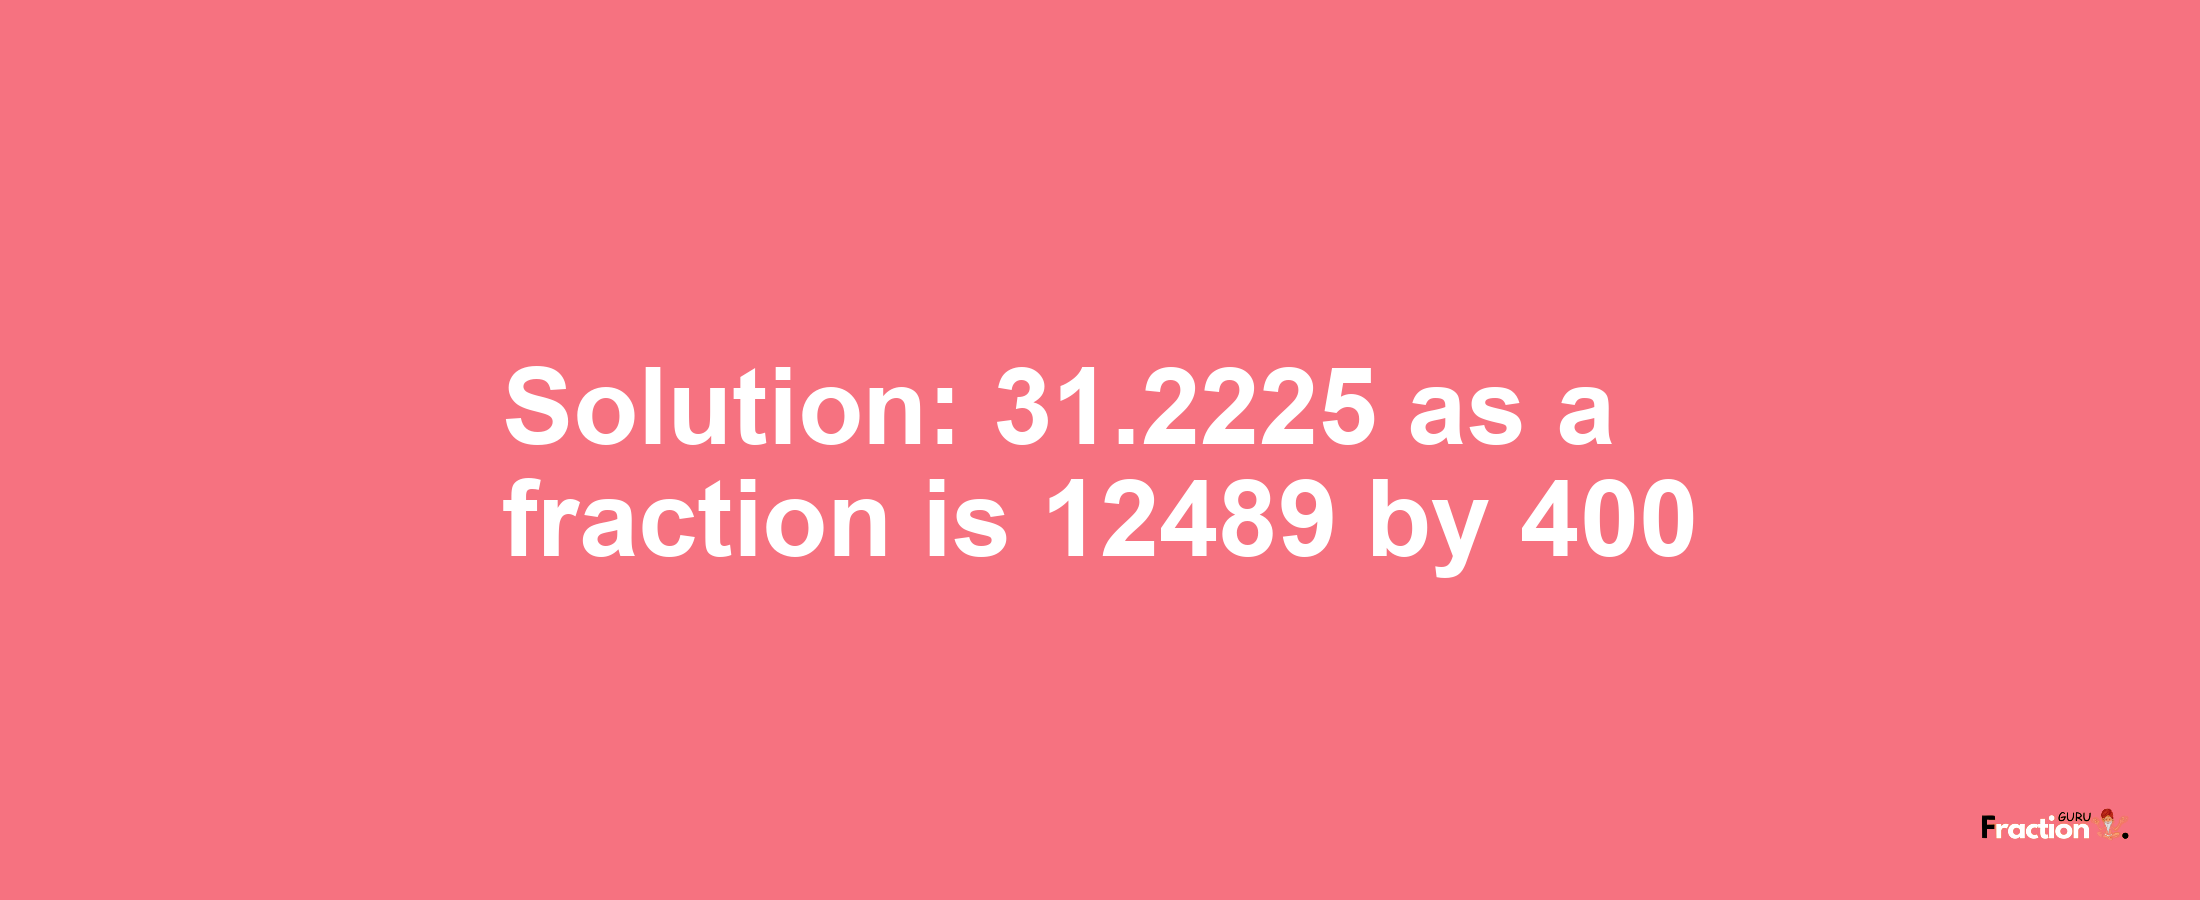 Solution:31.2225 as a fraction is 12489/400